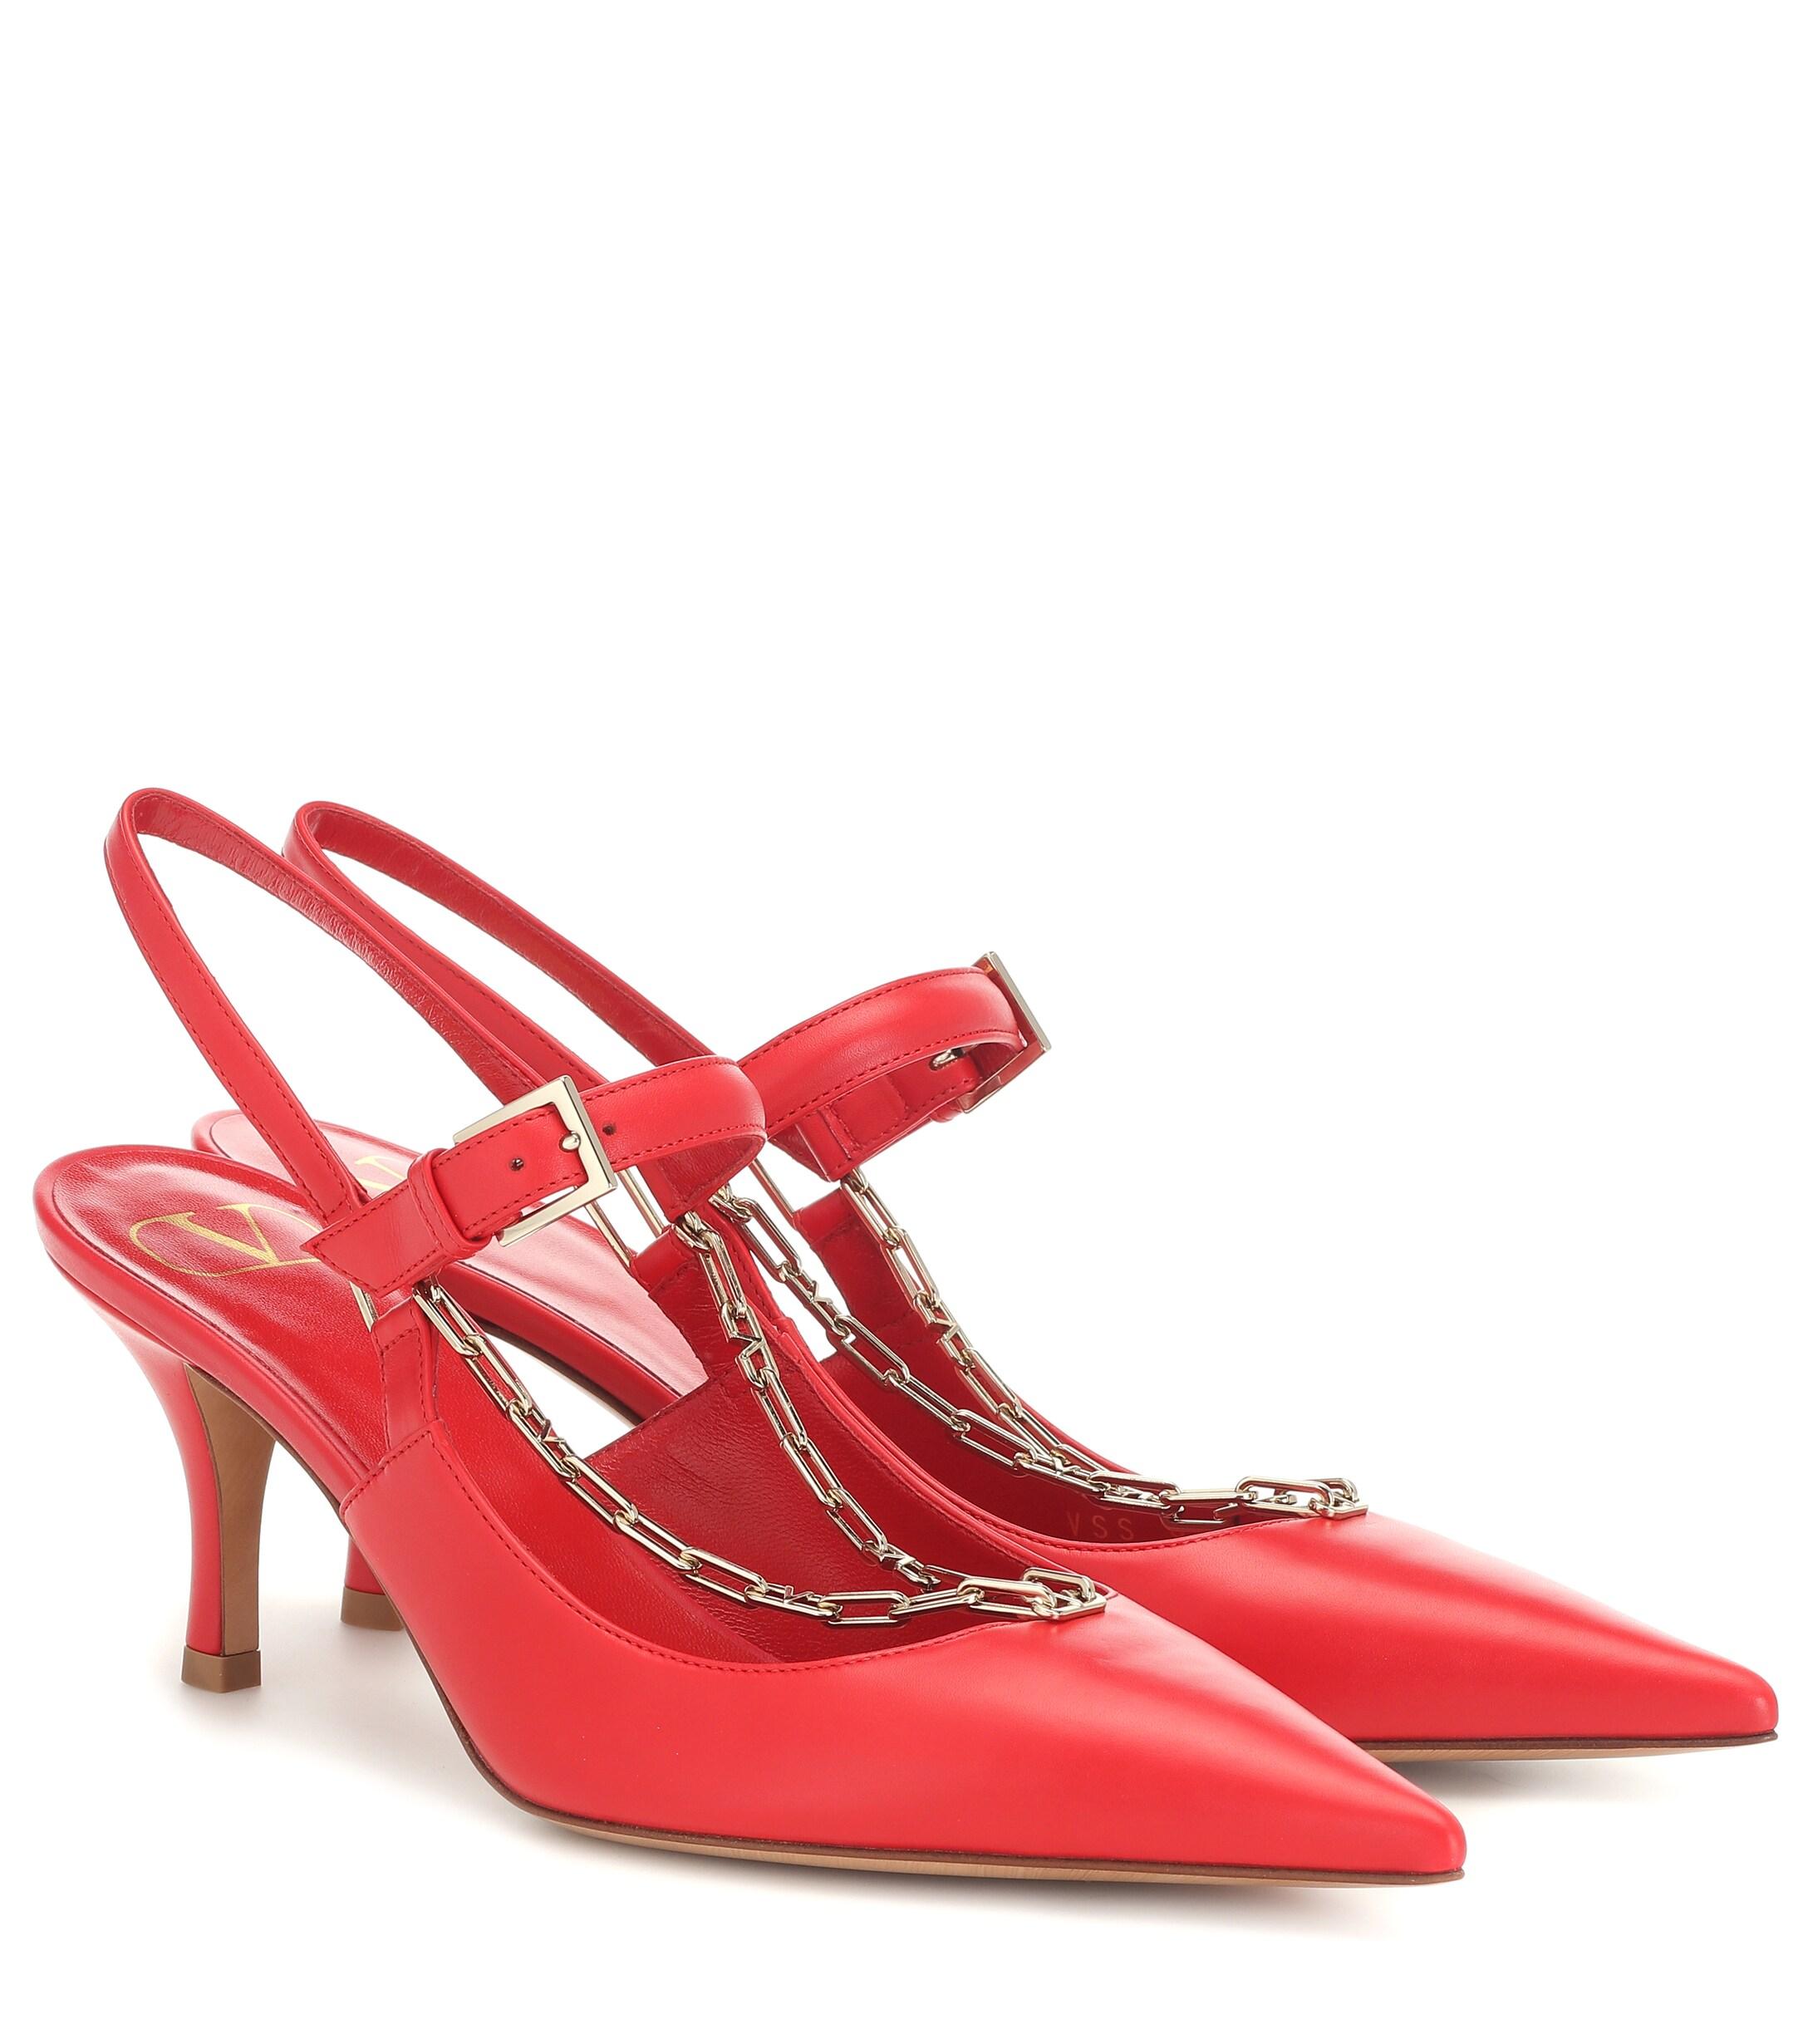 Valentino Chain Leather Pumps in Red - Lyst